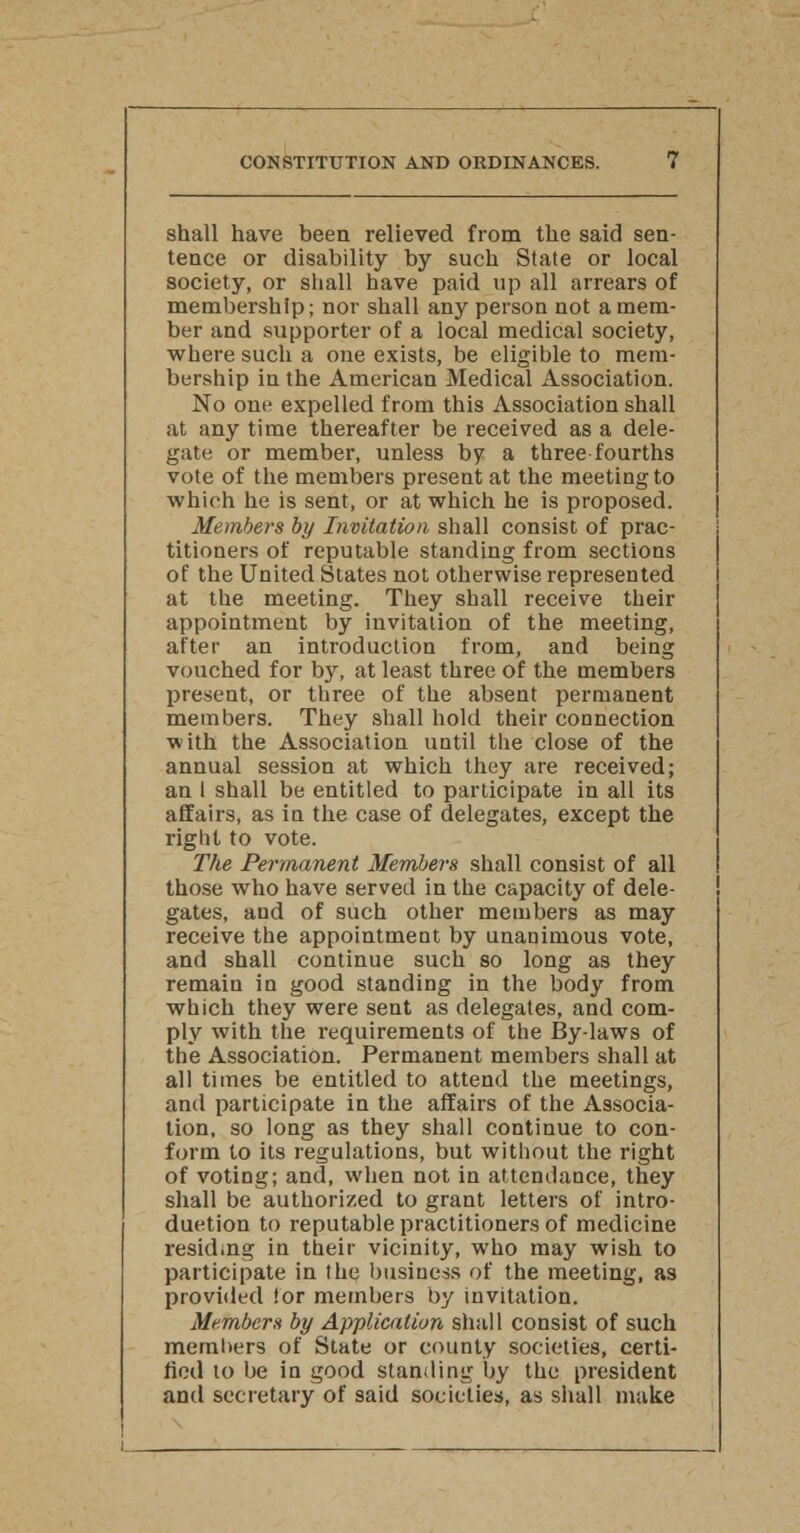 shall have been relieved from the said sen- tence or disability by such State or local society, or shall have paid up all arrears of membership; nor shall any person not a mem- ber and supporter of a local medical society, where such a one exists, be eligible to mem- bership in the American Medical Association. No one expelled from this Association shall at any time thereafter be received as a dele- gate or member, unless b7 a three fourths vote of the members present at the meeting to which he is sent, or at which he is proposed. Members by Invitation shall consist of prac- titioners of reputable standing from sections of the United States not otherwise represented at the meeting. They shall receive their appointment by invitation of the meeting, after an introduction from, and being vouched for by, at least three of the members present, or three of the absent permanent members. They shall hold their connection ■with the Association until the close of the annual session at which they are received; an I shall be entitled to participate in all its affairs, as in the case of delegates, except the right to vote. The Permanent Members shall consist of all those who have served in the capacity of dele- gates, and of such other members as may receive the appointment by unanimous vote, and shall continue such so long as they remain in good standing in the body from which they were sent as delegates, and com- ply with the requirements of the By-laws of the Association. Permanent members shall at all times be entitled to attend the meetings, and participate in the affairs of the Associa- tion, so long as they shall continue to con- form to its regulations, but without the right of voting; and, when not in attendance, they shall be authorized to grant letters of intro- duction to reputable practitioners of medicine residing in their vicinity, who may wish to participate in the business of the meeting, as provided lor members by invitation. Members by Application shall consist of such members of State or county societies, certi- fied to be in good standing by the president and secretary of said societies, as shall make